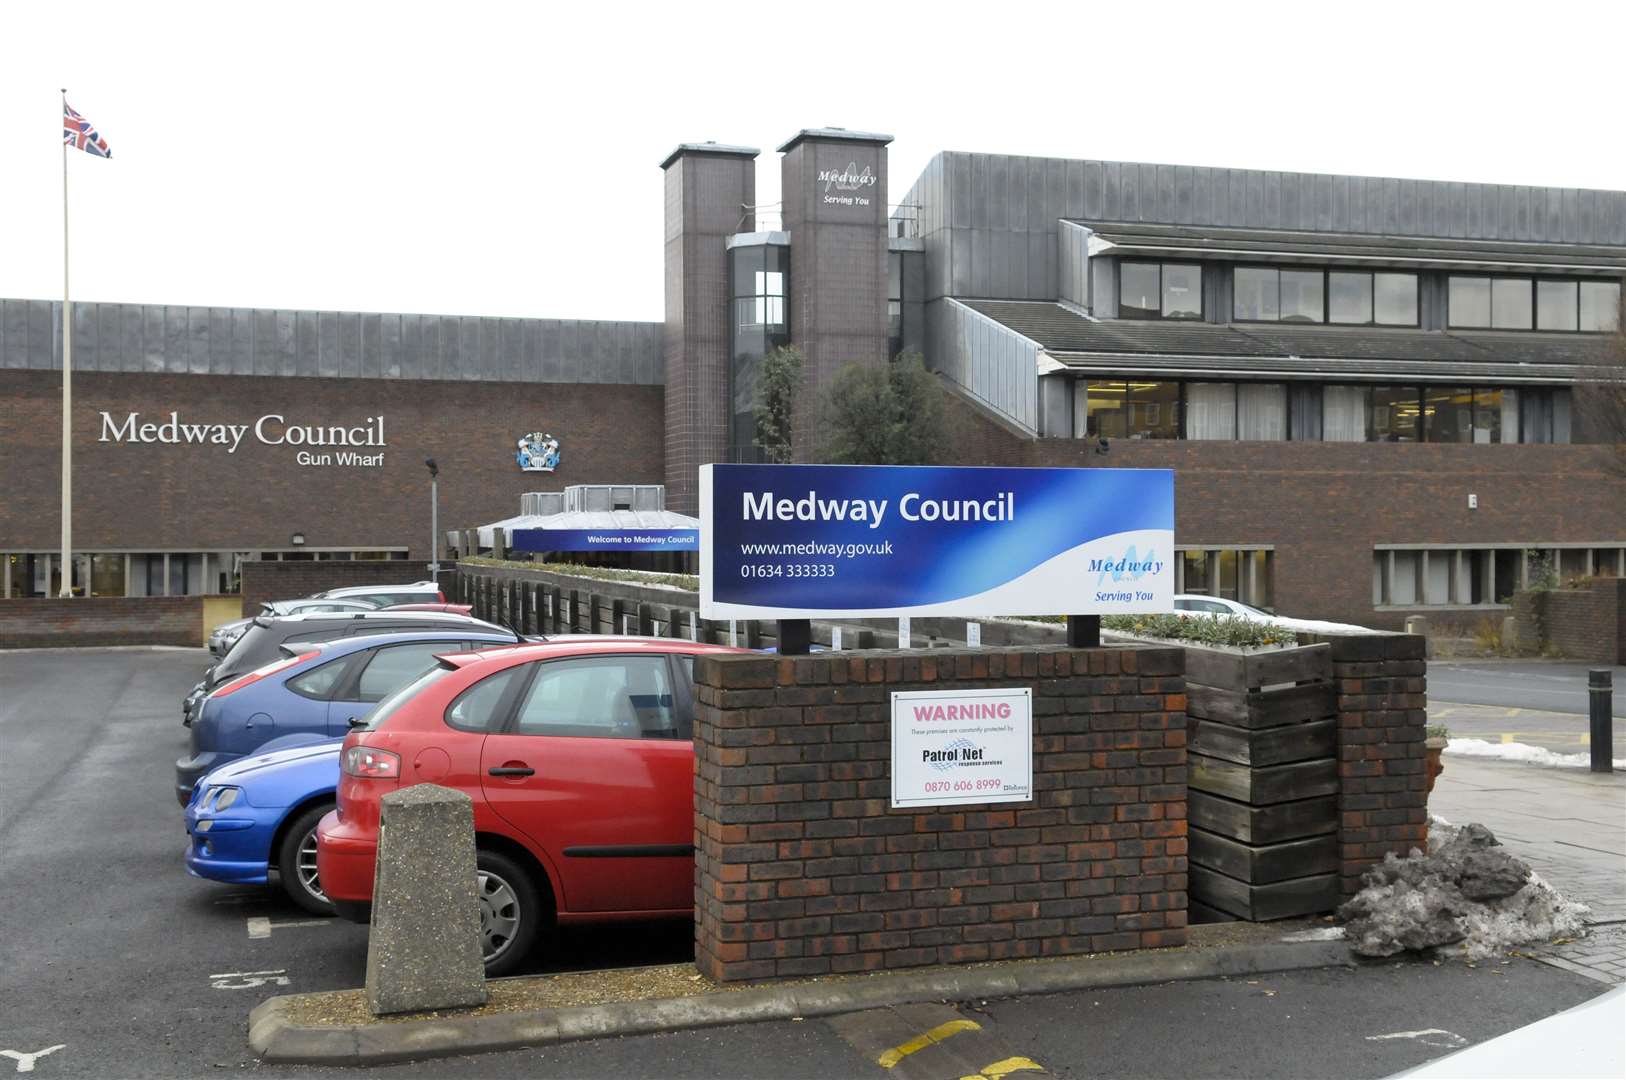 Medway Council's Chatham headquarters